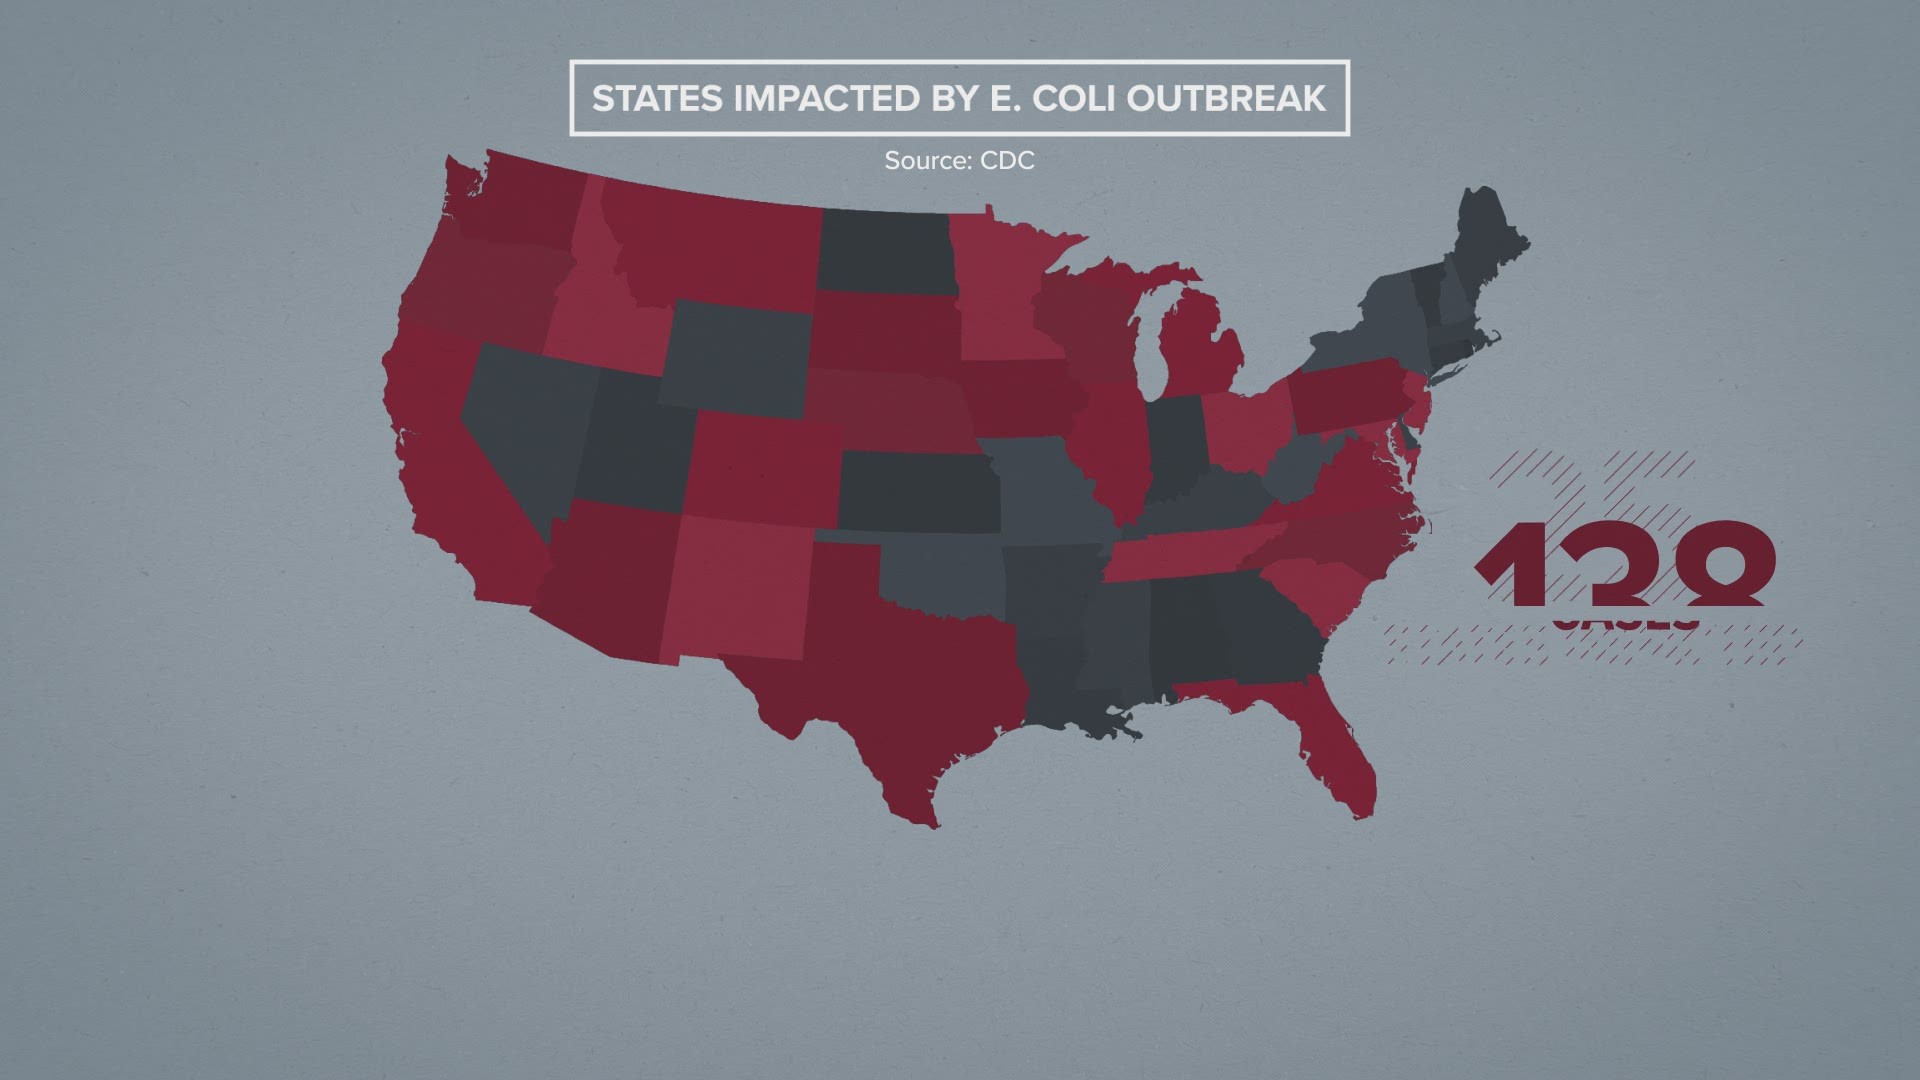 25 states impacted by the Romaine lettuce E. coli outbreak.